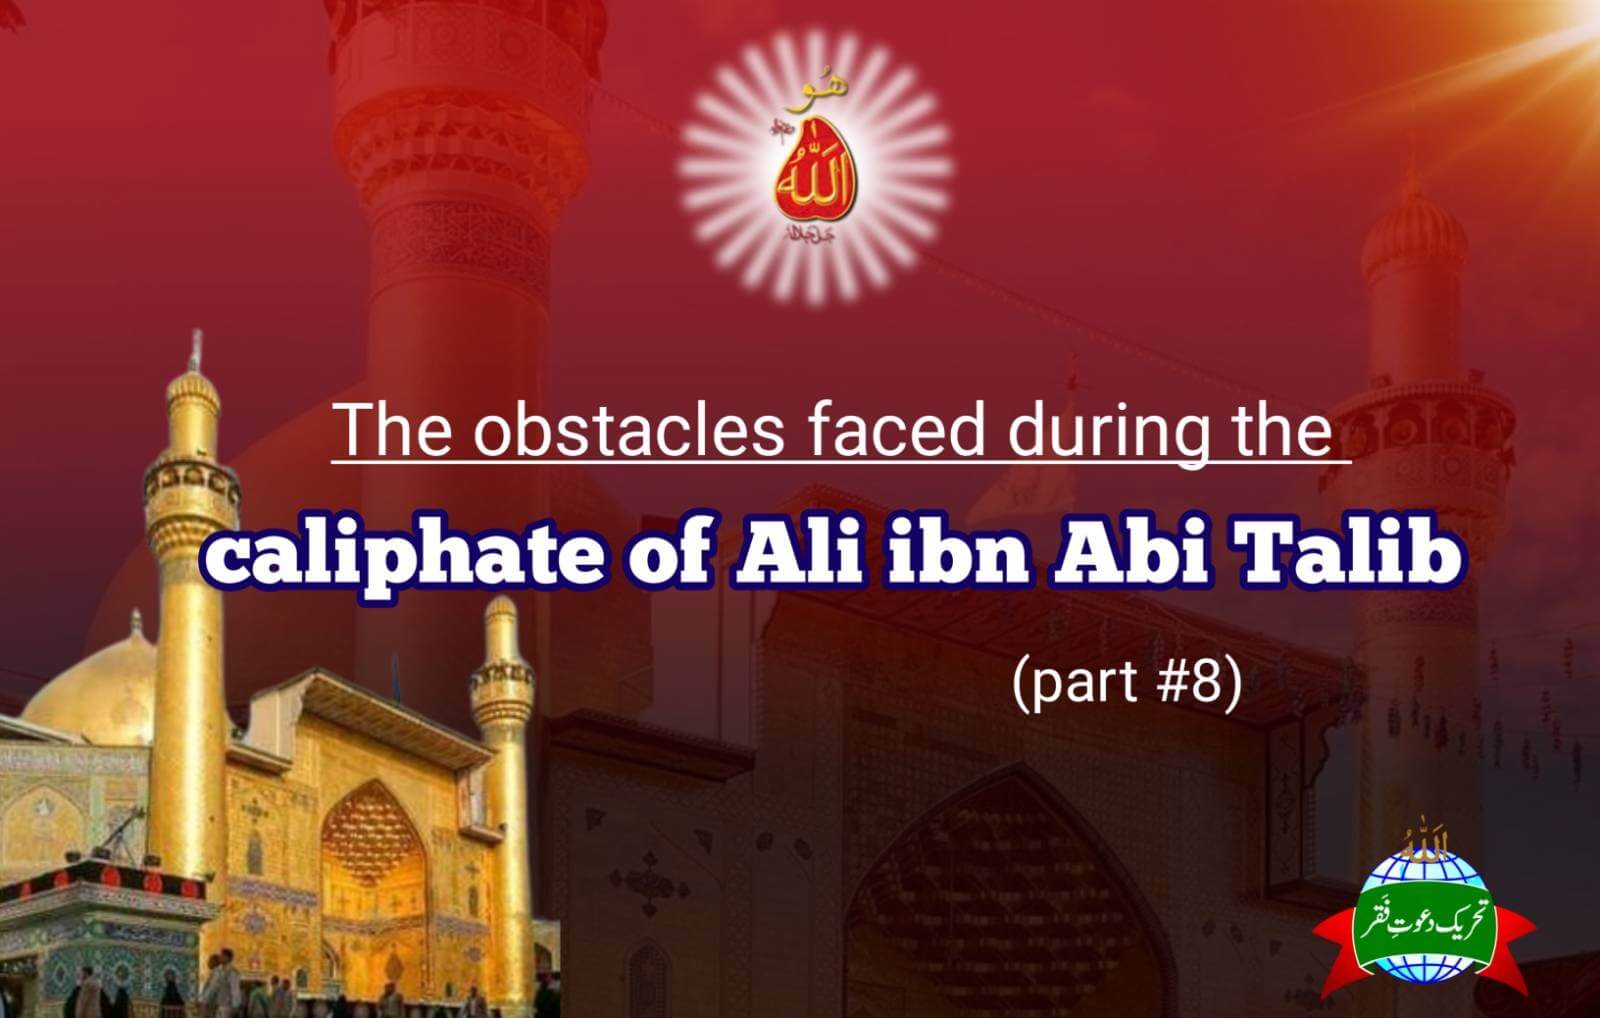 THE OBSTACLES FACED DURING THE CALIPHATE OF ALI IBN ABI TALIB